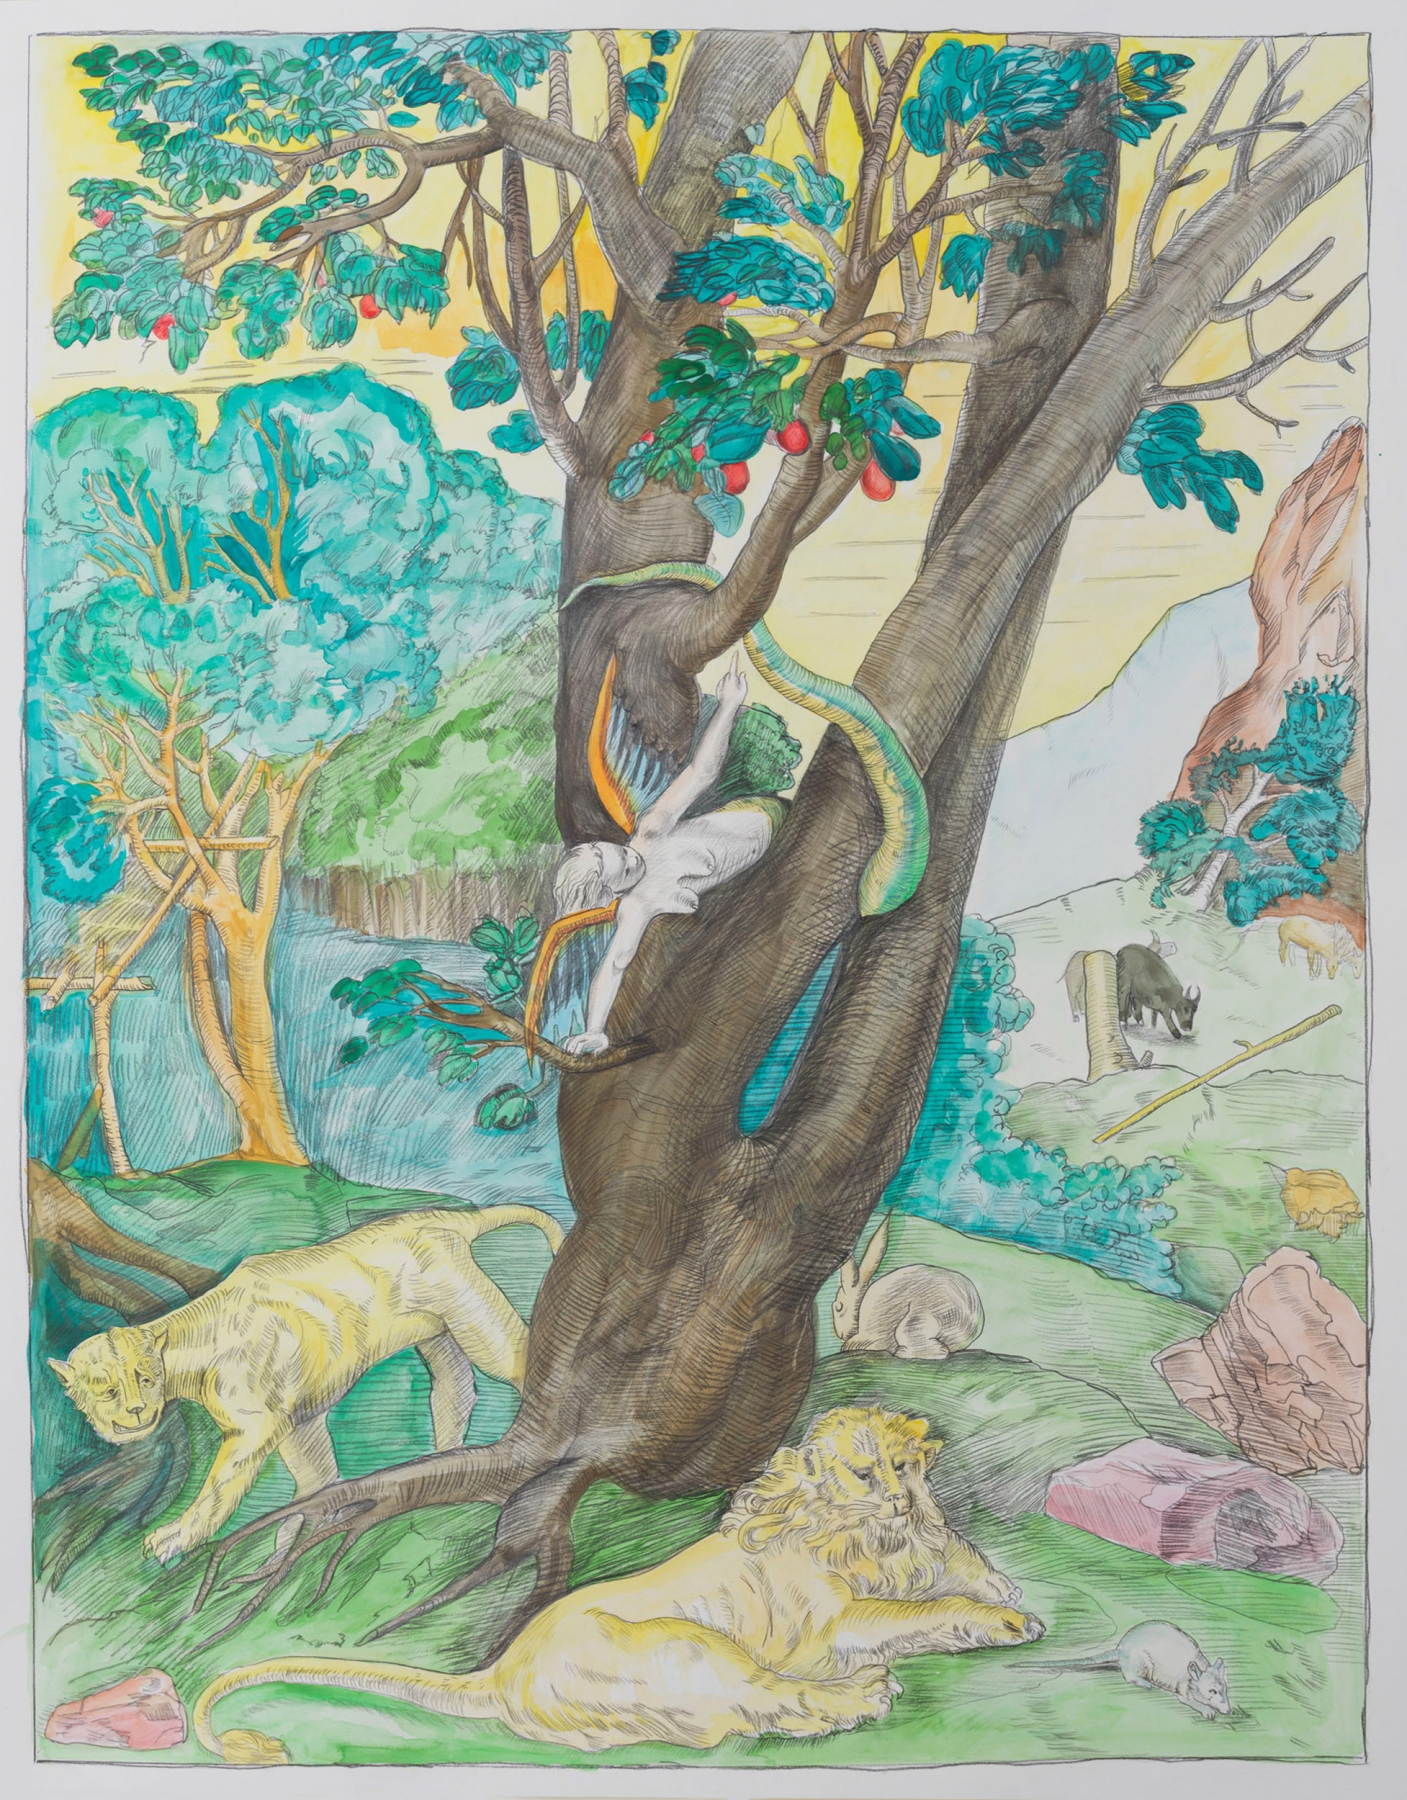 Ken Gonzales-Day

Untitled (After Theodore de Bry, Adam and Eve, America, Plate 1, V. 1, 1590-1603), 2021

Color pencil and archival ink on rag paper

33.5 x 25.25 in (85.1 x 64.1 cm)